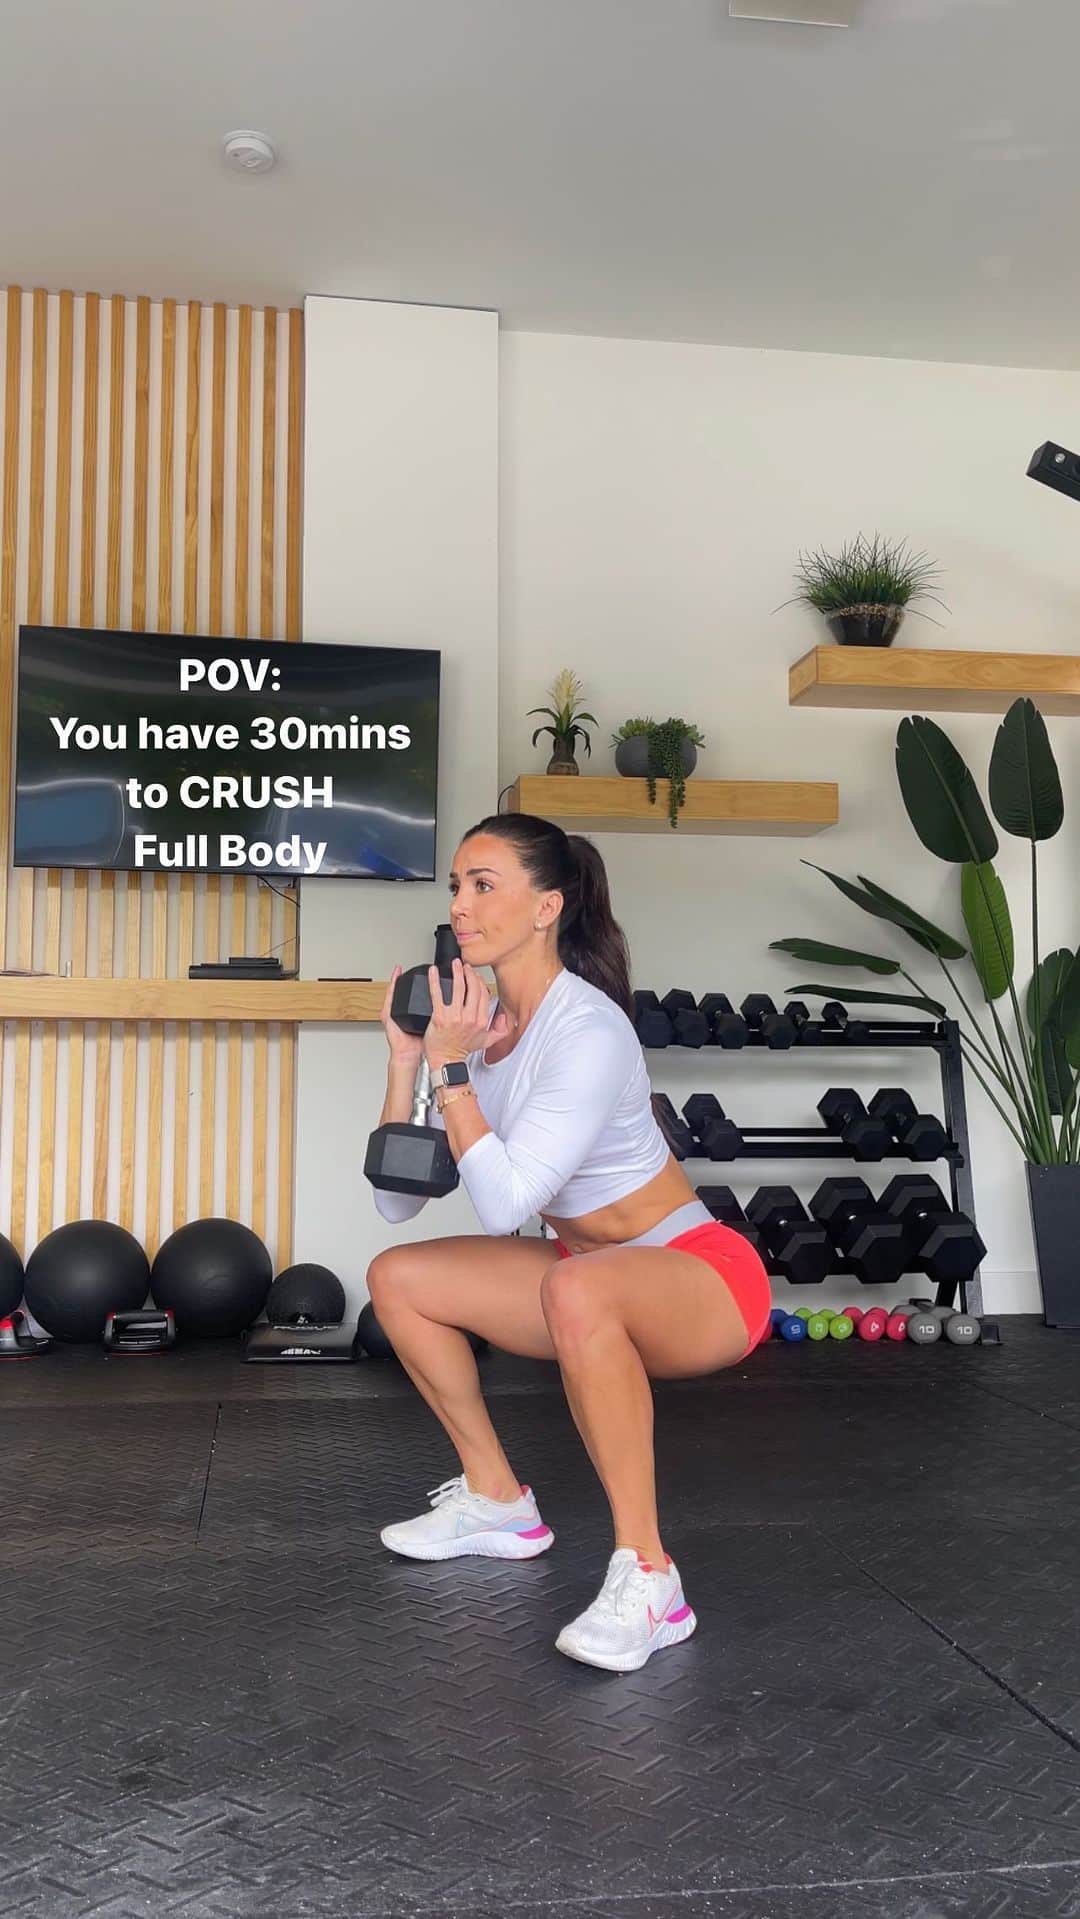 Ainsley Rodriguezのインスタグラム：「30 MIN FULL BODY CRUSHED 🥵! . Save this for when you’re short on time and need to get in a quick and efficient workout! . These are my favorite workouts! I LOVE full body workouts especially when I’m short on time or only have a few days to workout! . Go as heavy as you can in weight while maintaining your form and rest as needed! . Repeat for 5 Rounds ✋🏼 . 16 alternating clean to press (8 per side) 10 goblet complexes (you’re going squat to fwd lunge to rev lunge and 5 on each side) 10 Deadlift to Rows 10 DB Push ups 10 weighted V-ups 10 burpees over DB . #homeworkout #fullbodyworkout #newyearworkout」